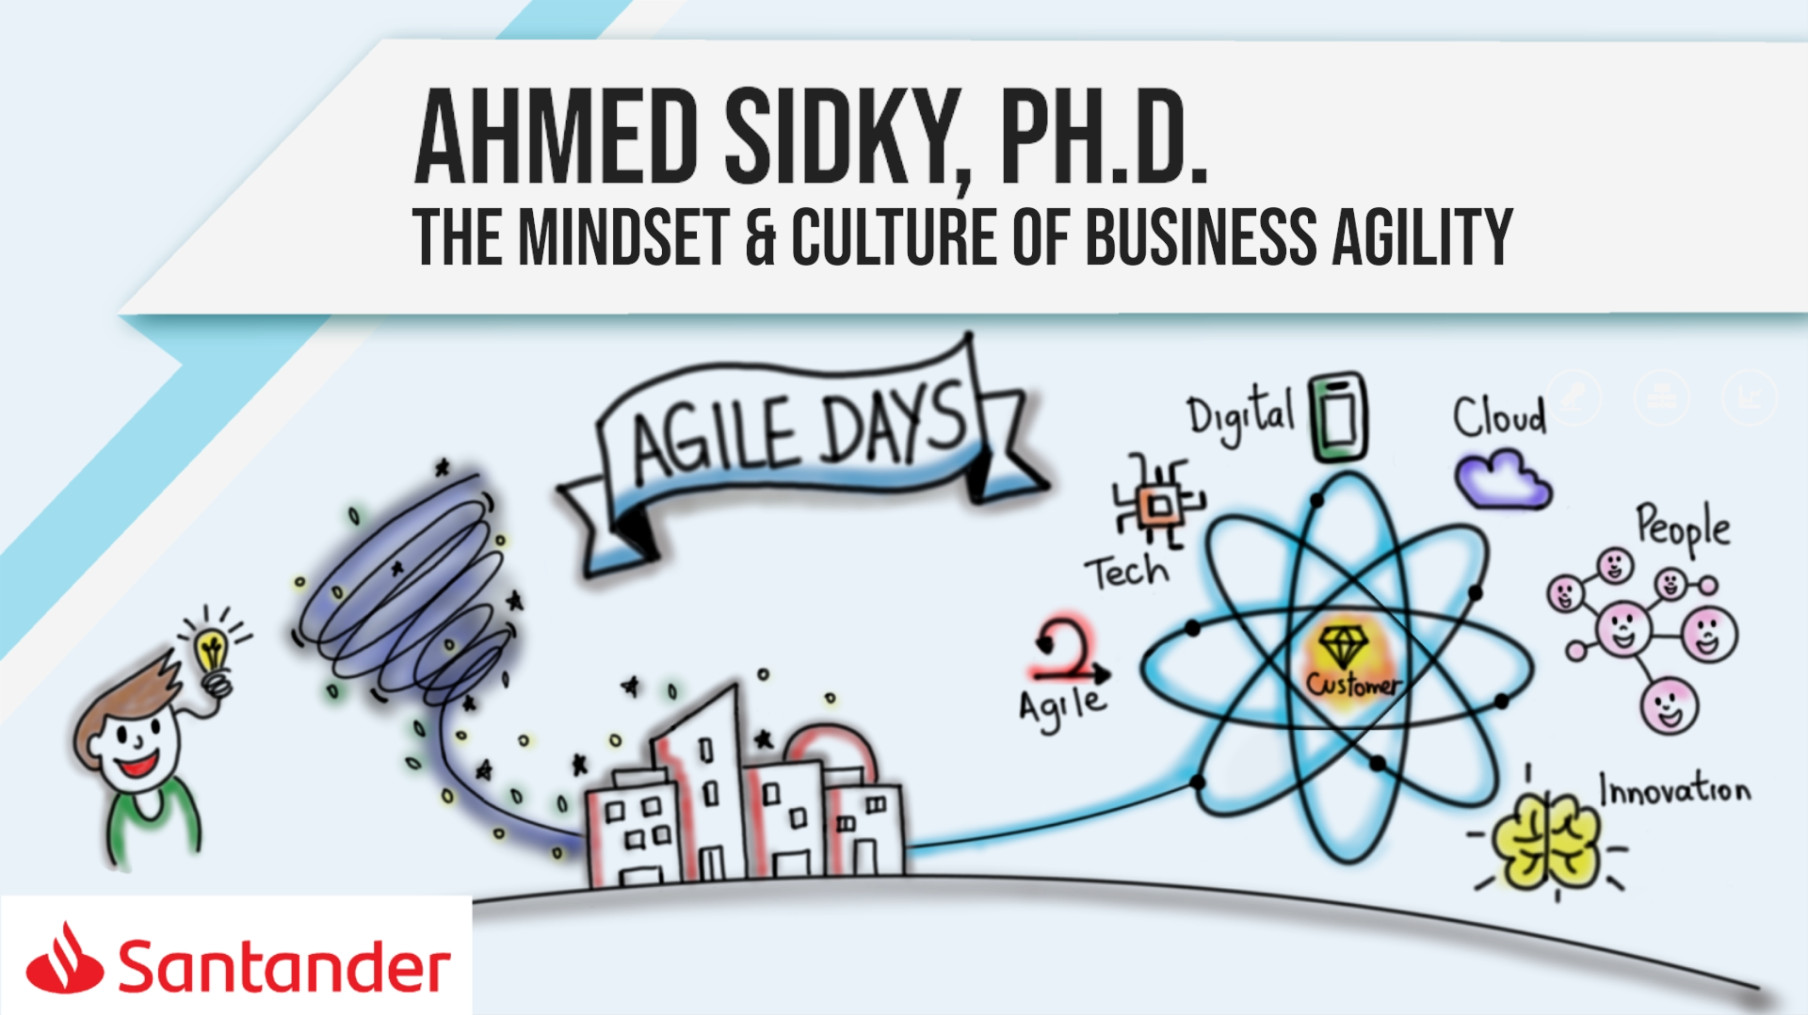 The Mindset & Culture of Business Agility